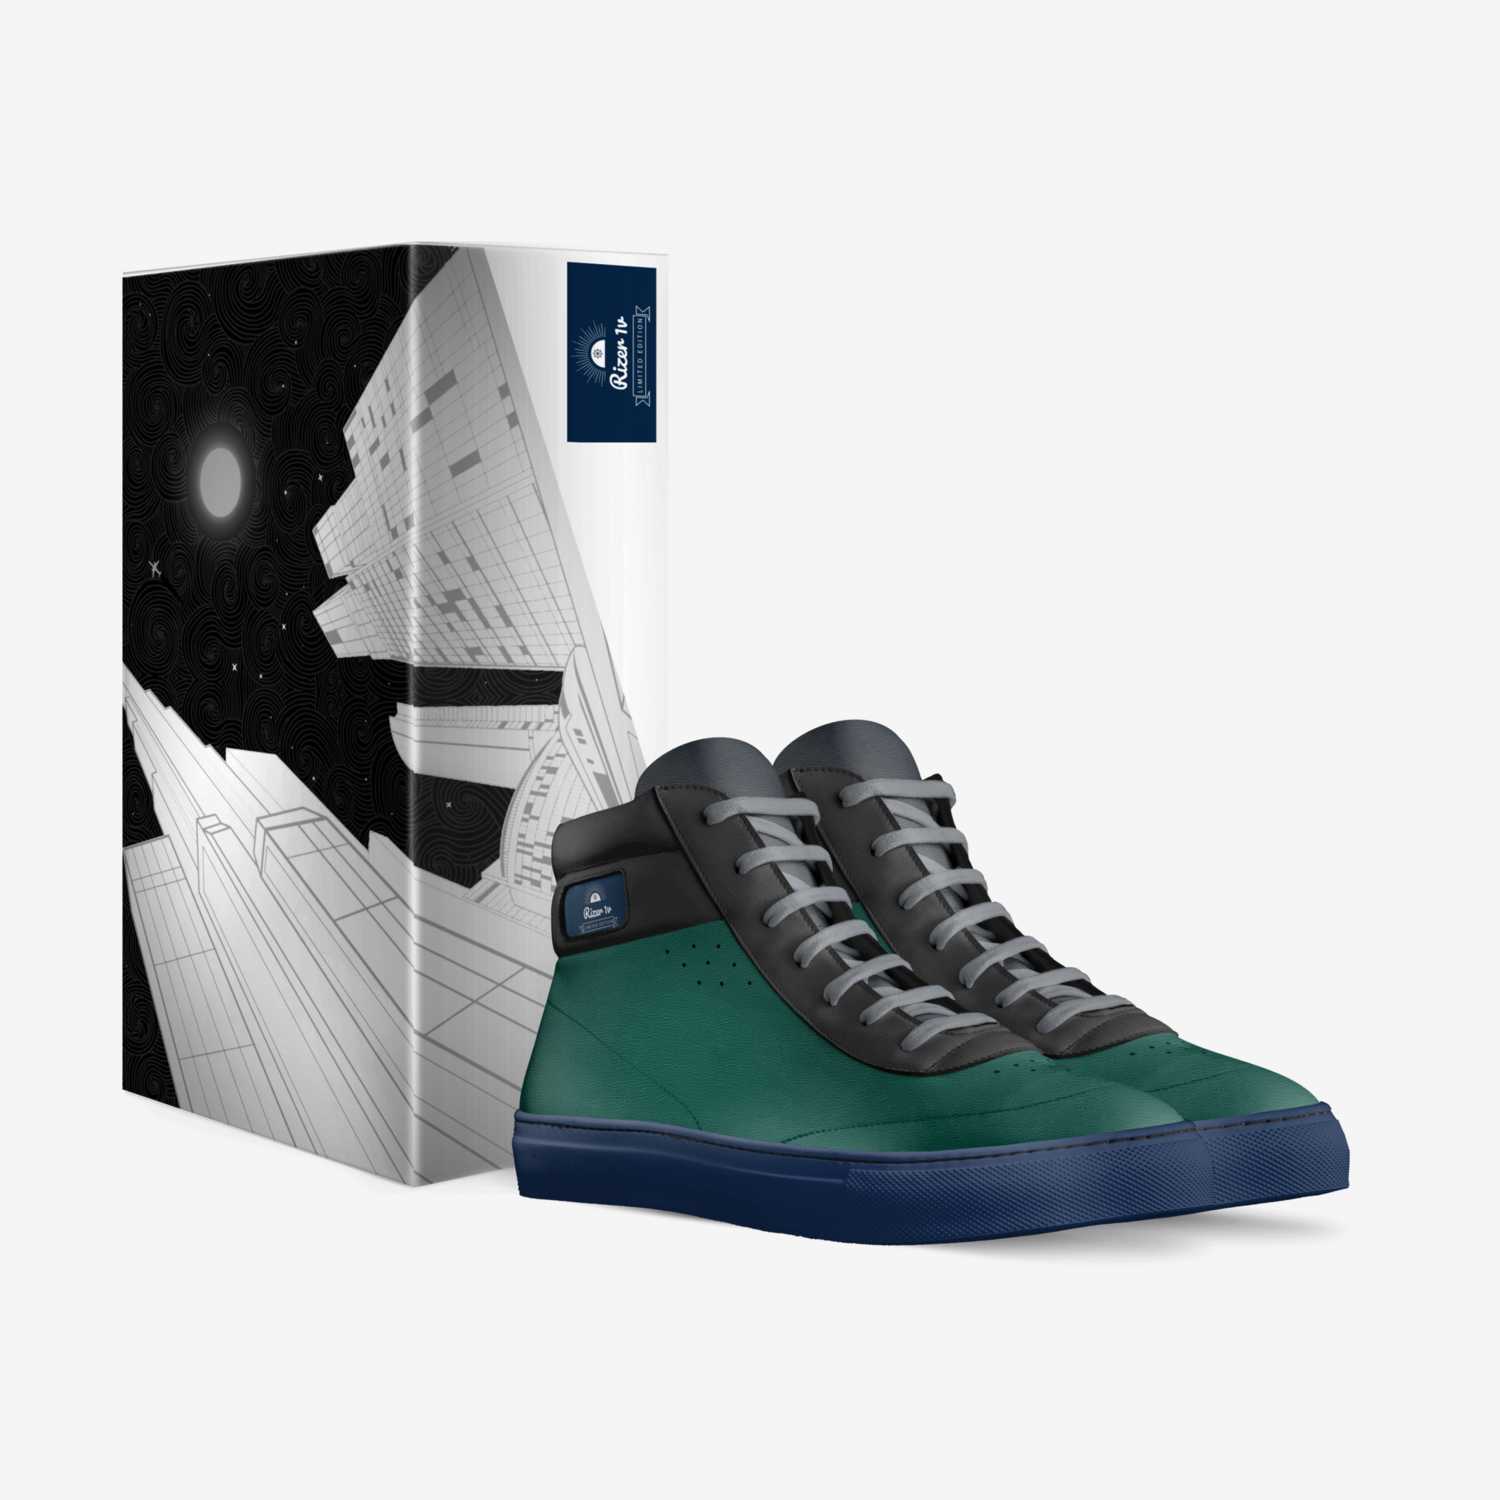 Rizer 1v custom made in Italy shoes by Drake Moneypenny | Box view